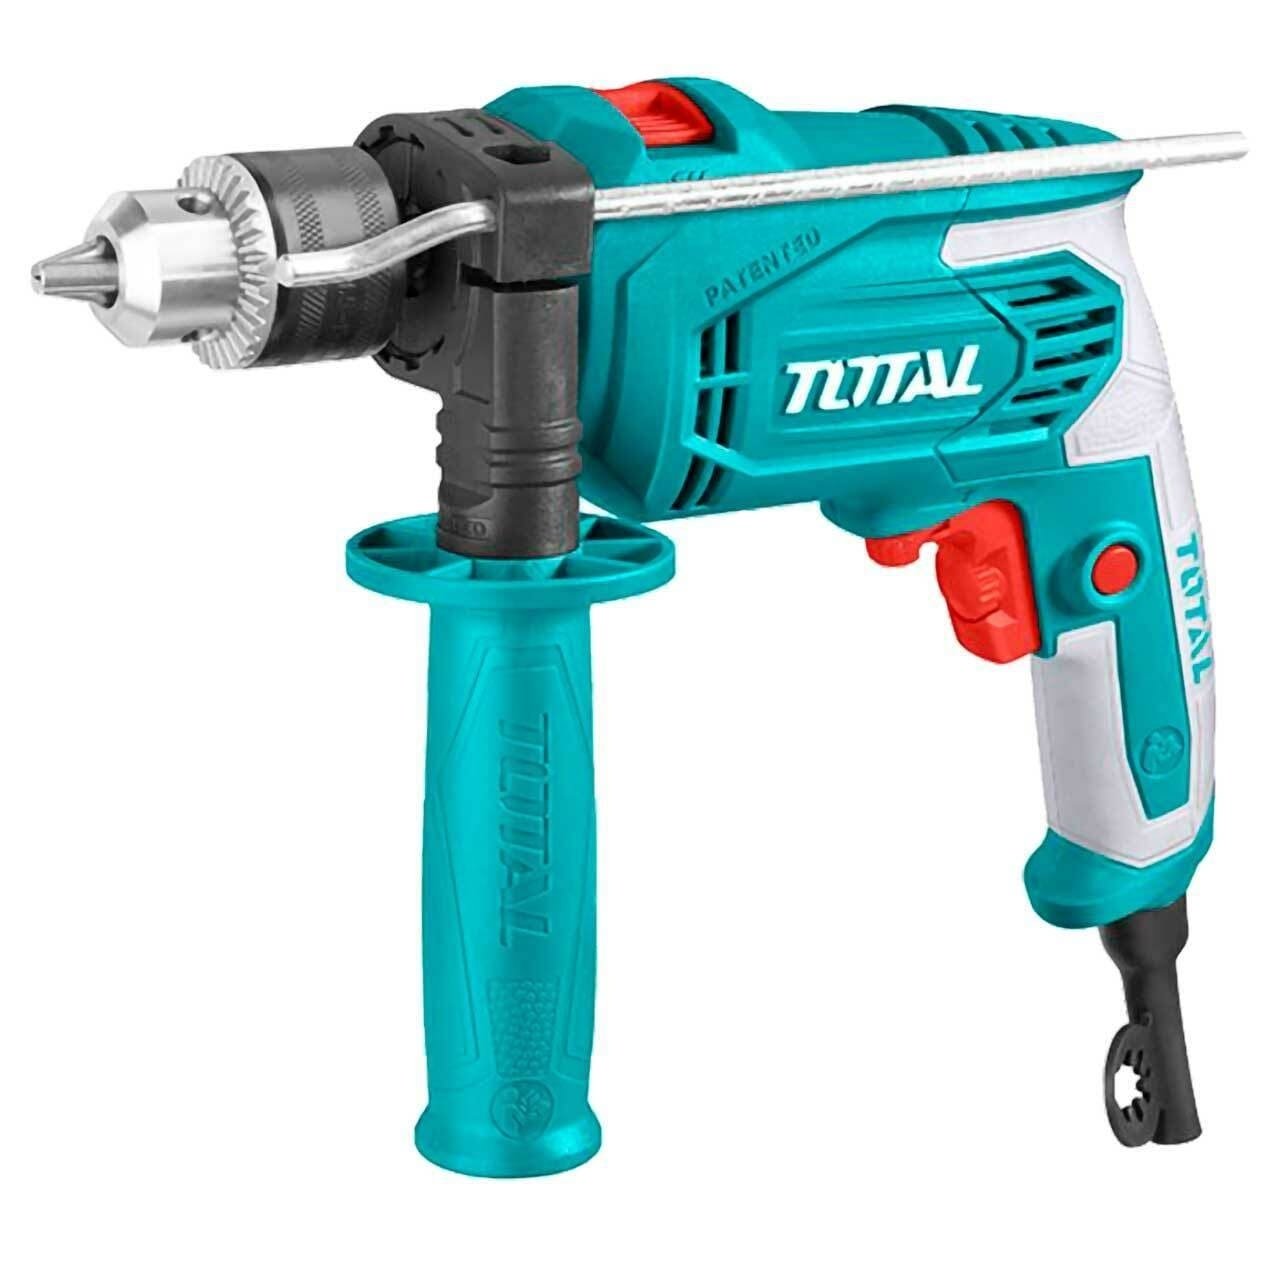 Total Hammer Impact Drill 680W - TG1061356 | Supply Master | Accra, Ghana Tools Building Steel Engineering Hardware tool